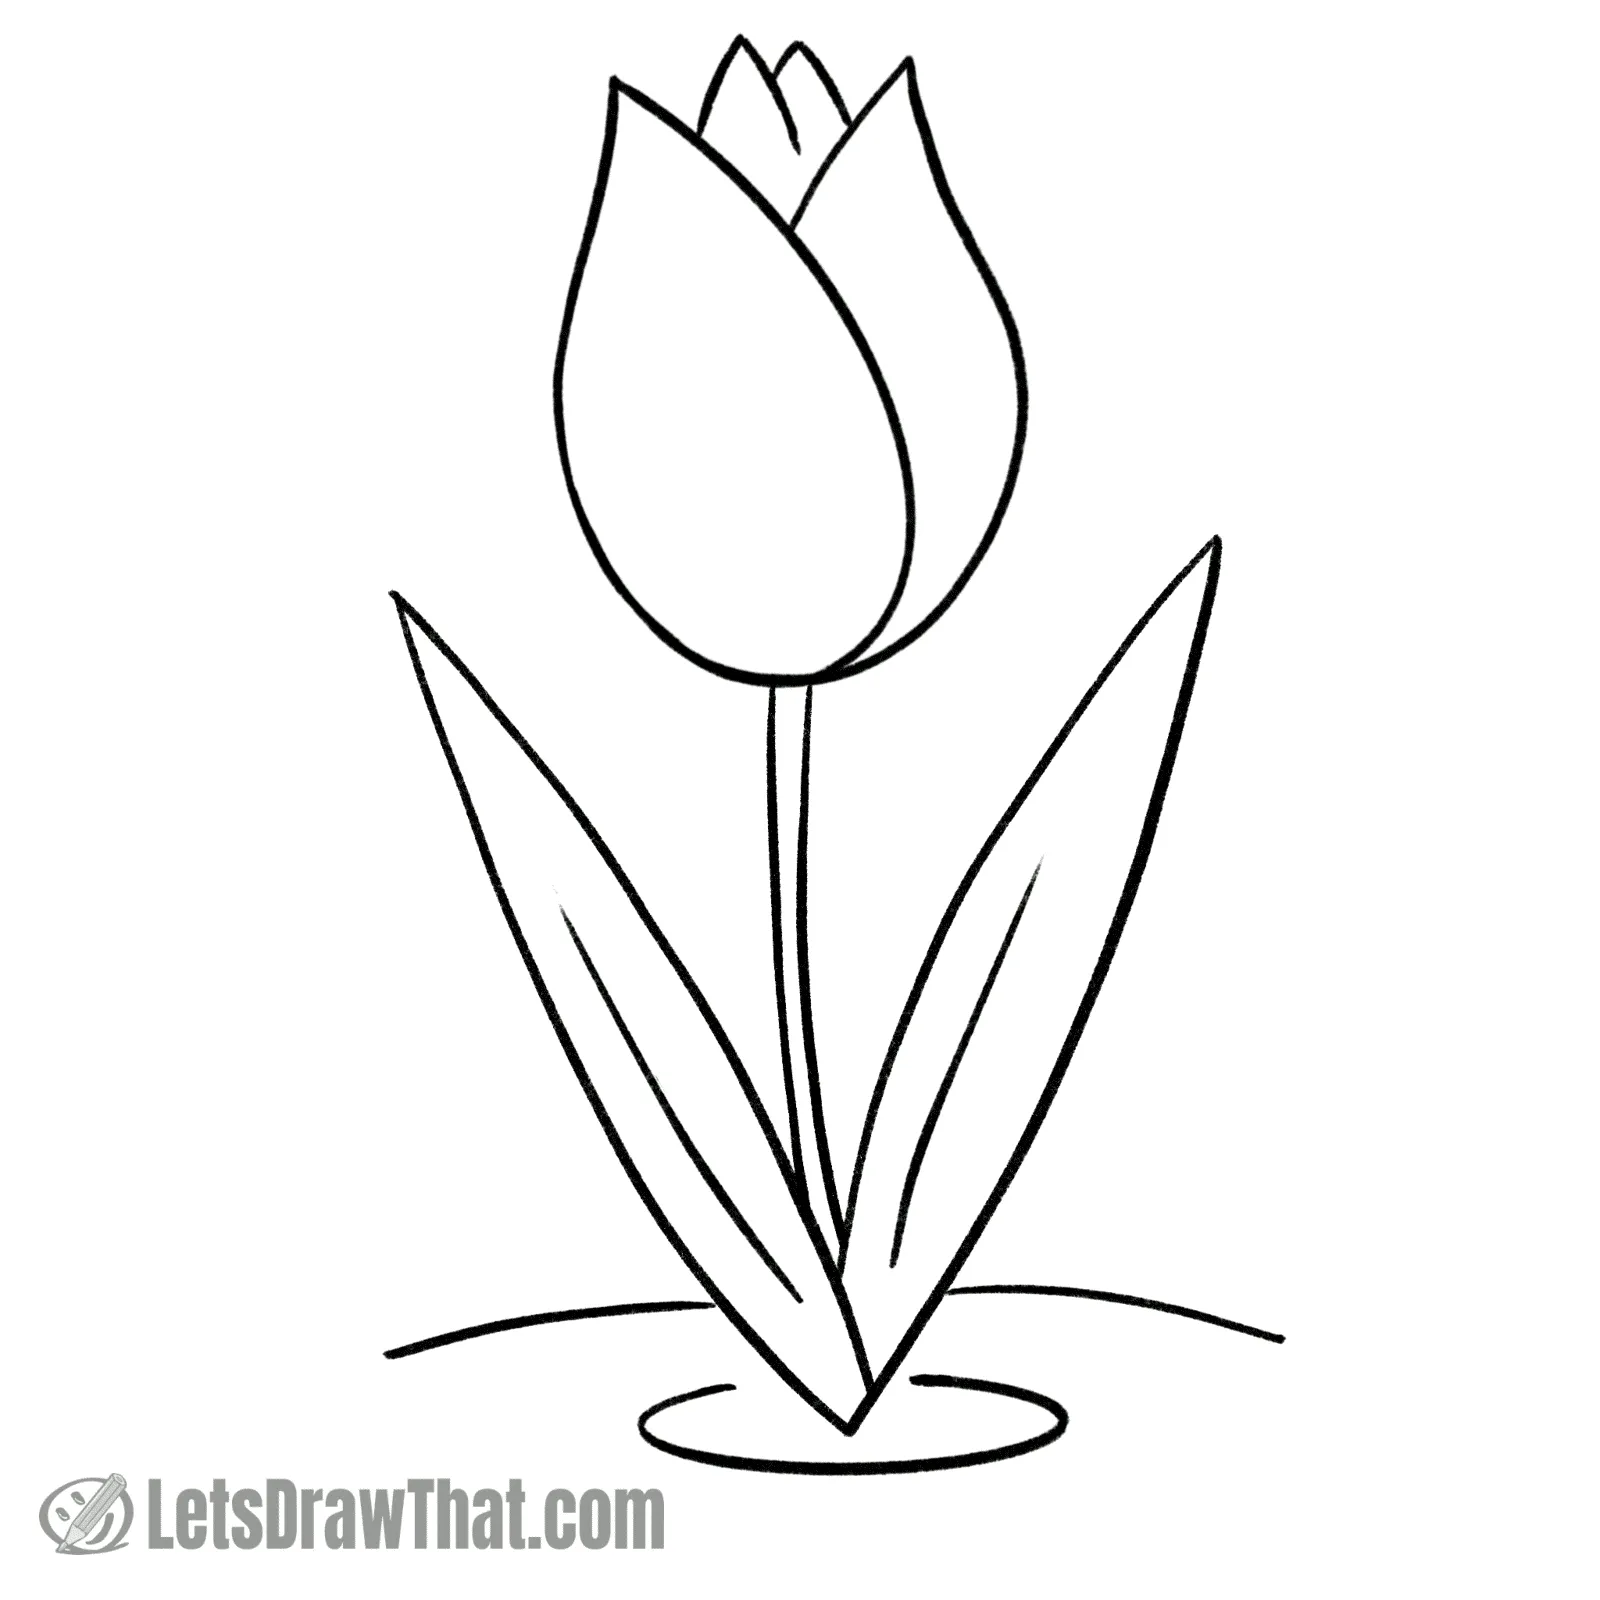 Simple tulip drawing - outline